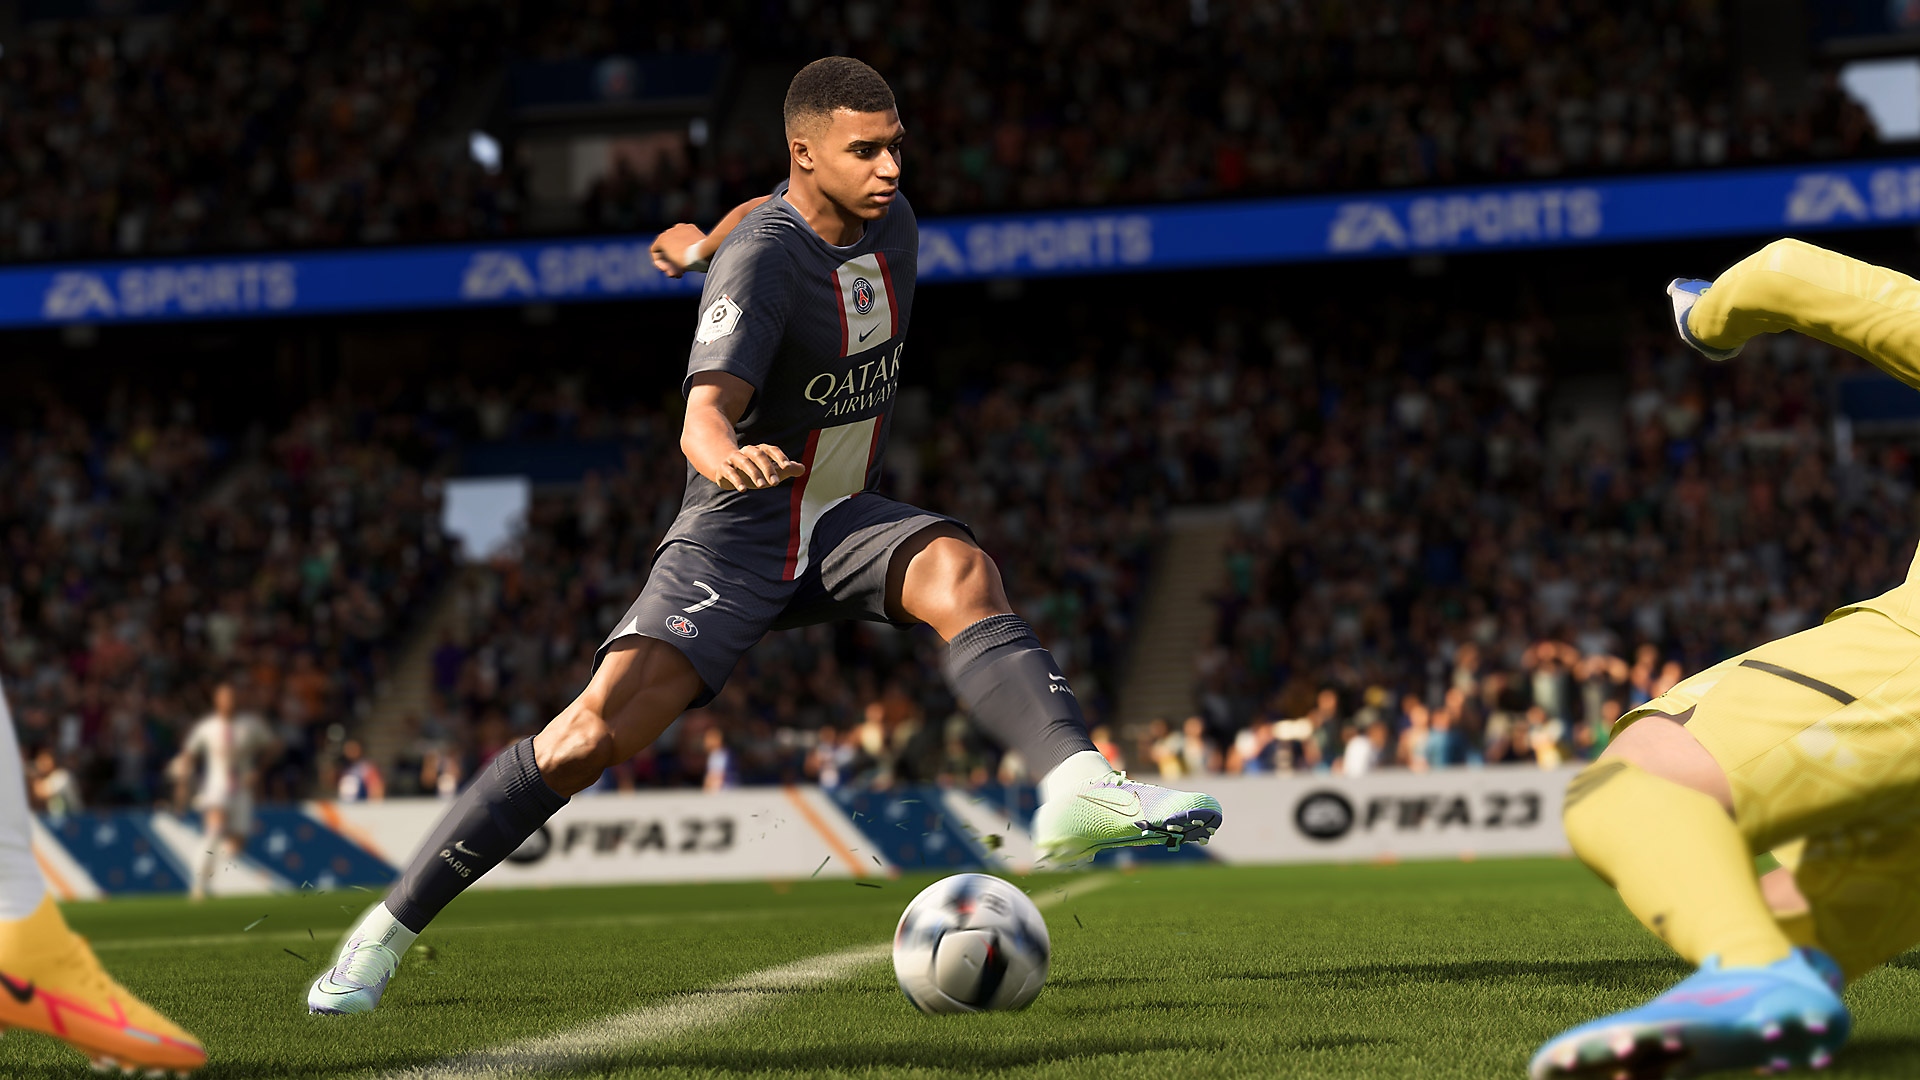 EA Sports FIFA 23 screenshot showing a player about to shoot